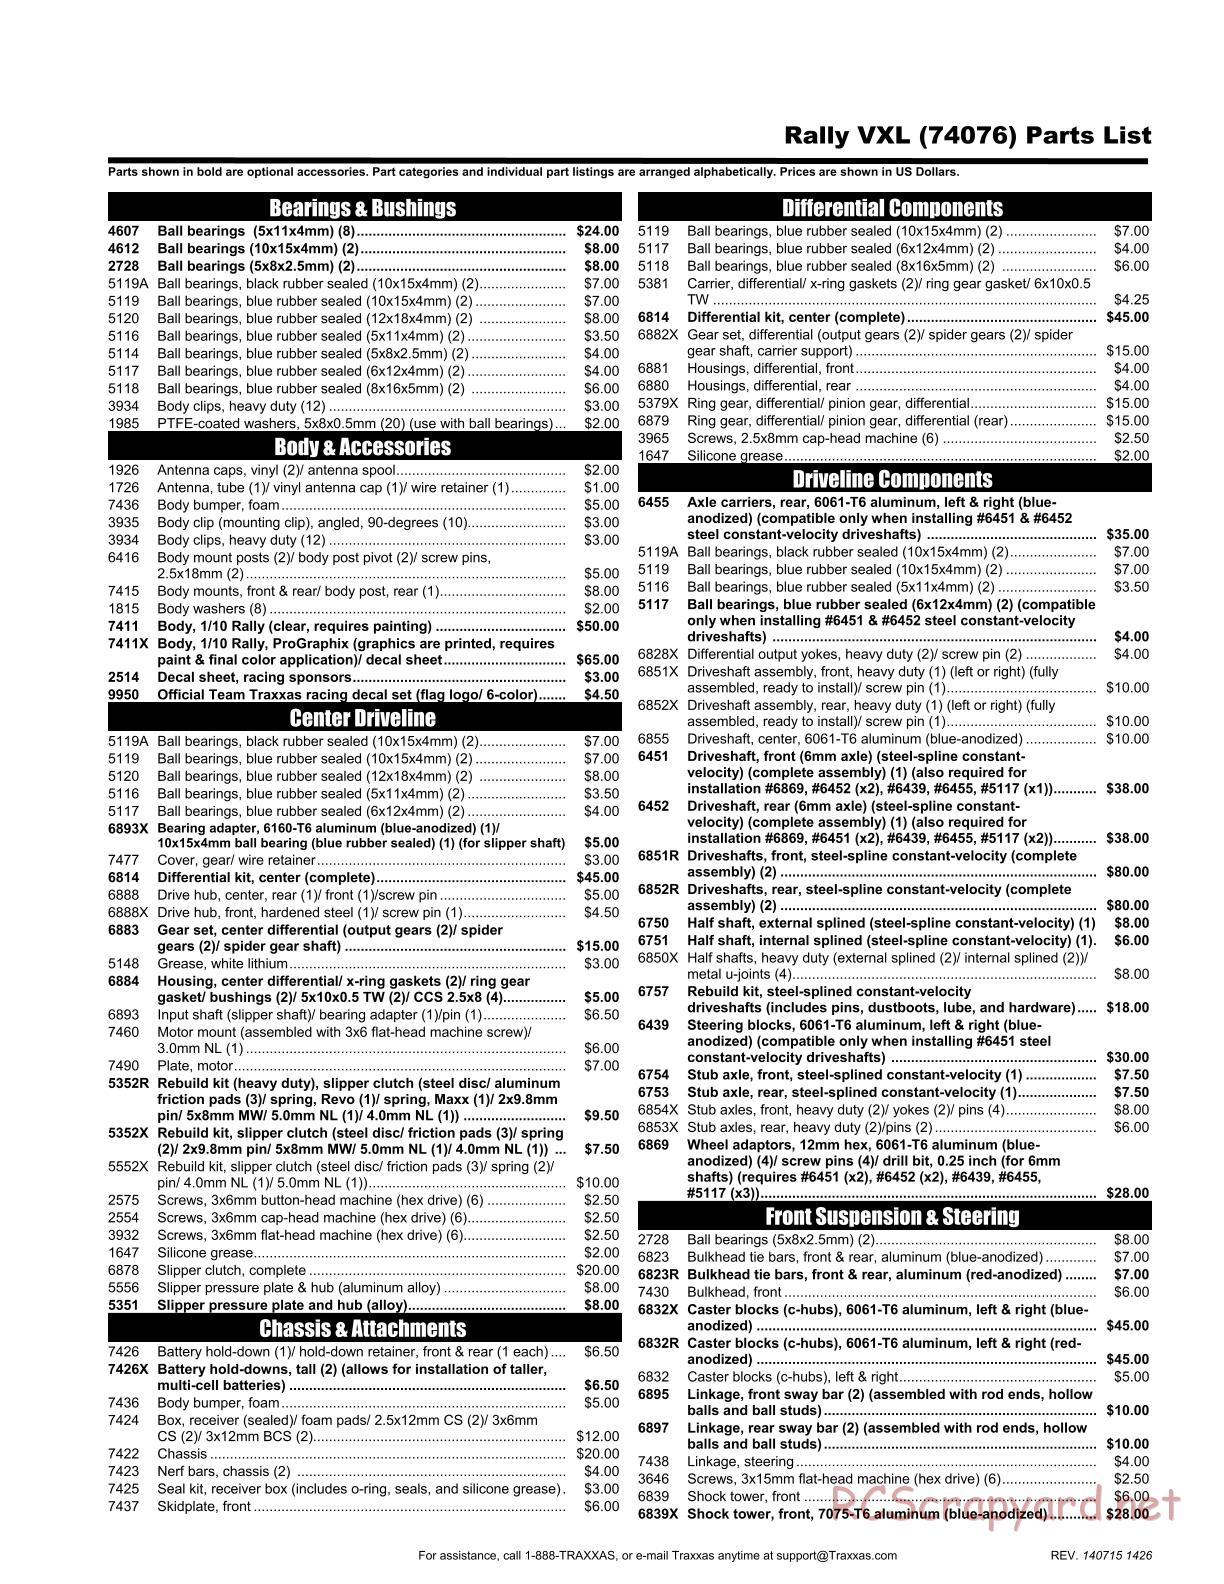 Traxxas - Rally (2014) - Parts List - Page 1